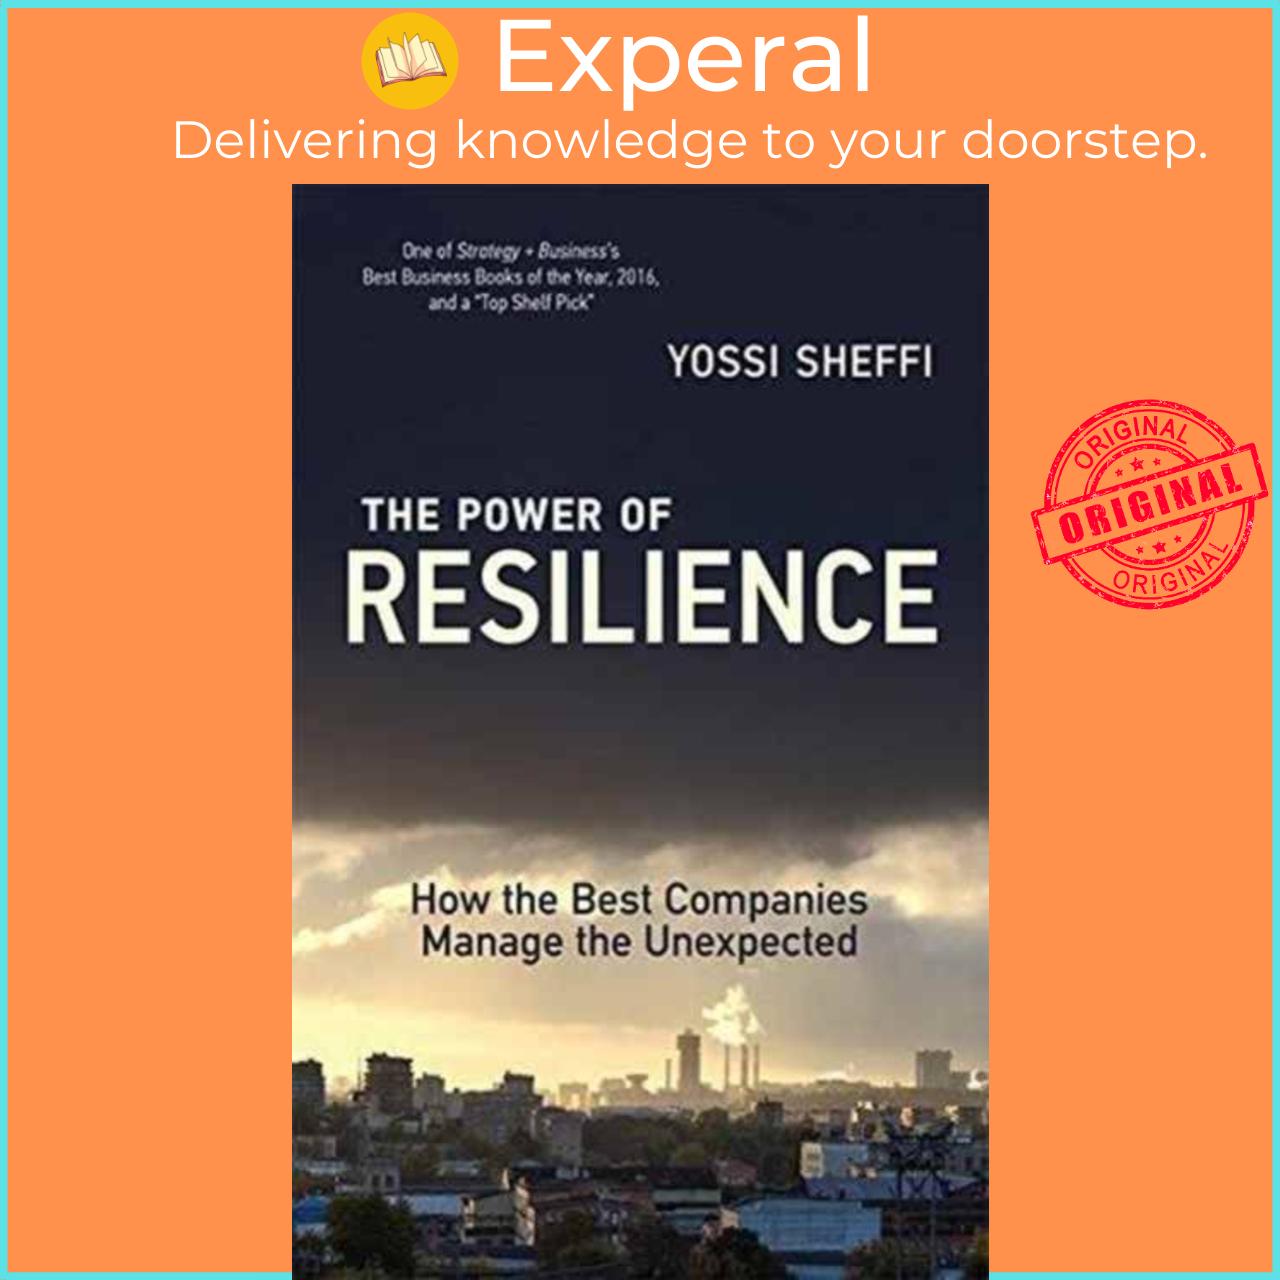 Sách - The Power of Resilience - How the Best Companies Manage the Unexpected by Yossi Sheffi (UK edition, paperback)